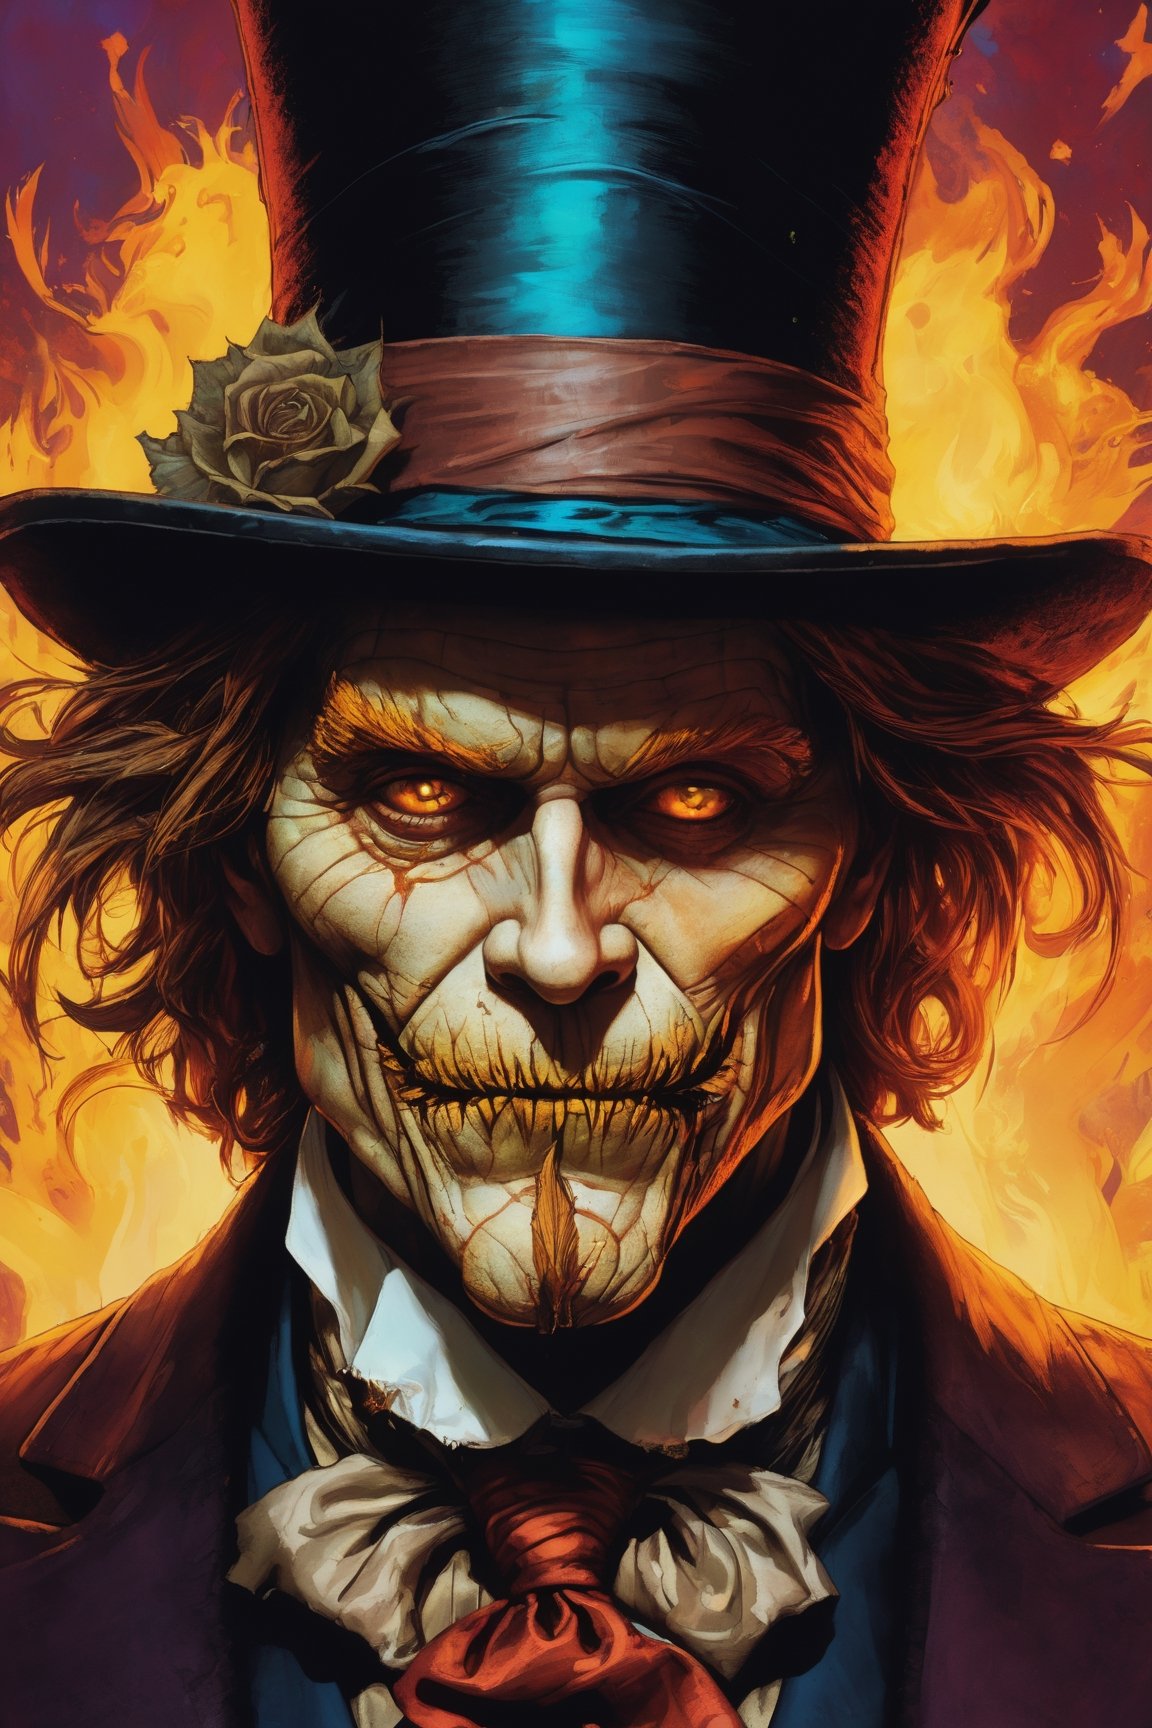 A close up of a man wearing a top hat, john picacio and brom, willem dafoe as scarecrow, best of behance, madhatter, josan gonzalez and tyler edlin, by Jack Davis,, character design, embers, bright bold colors, macro lens, dark fantasy, decopunk, cinematic, dslr, bokeh, american horror story, redneck